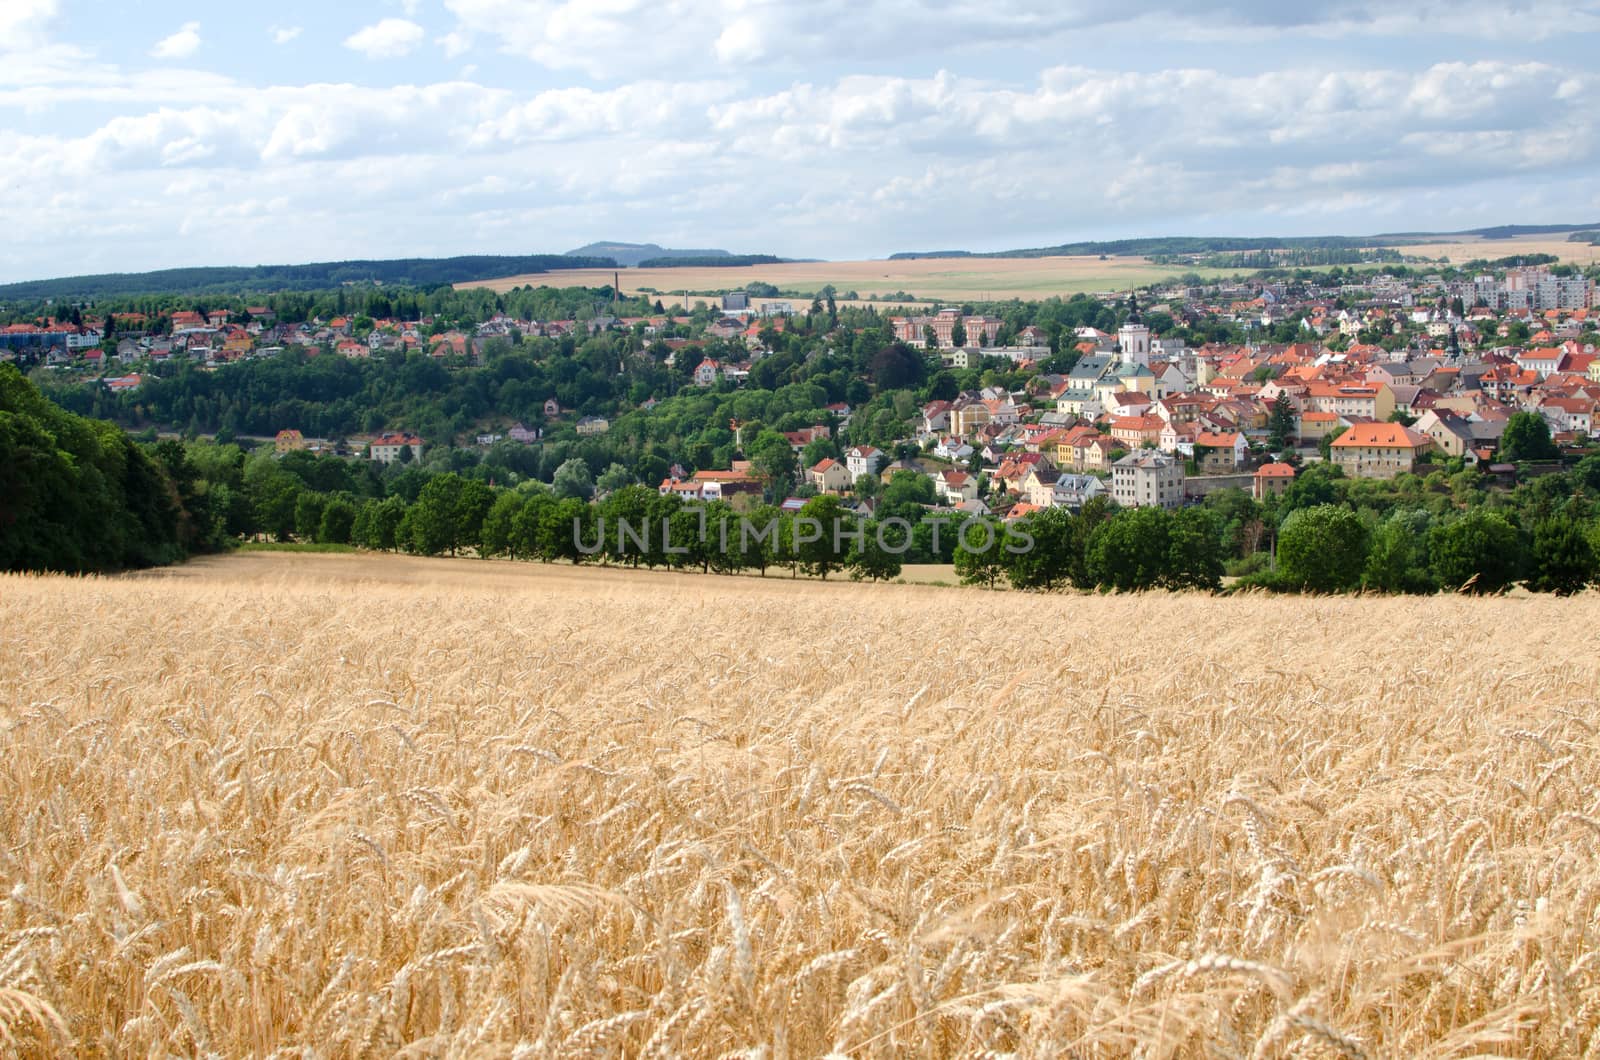 Horizontal landscape shot consisting of wheat field, town and forest.